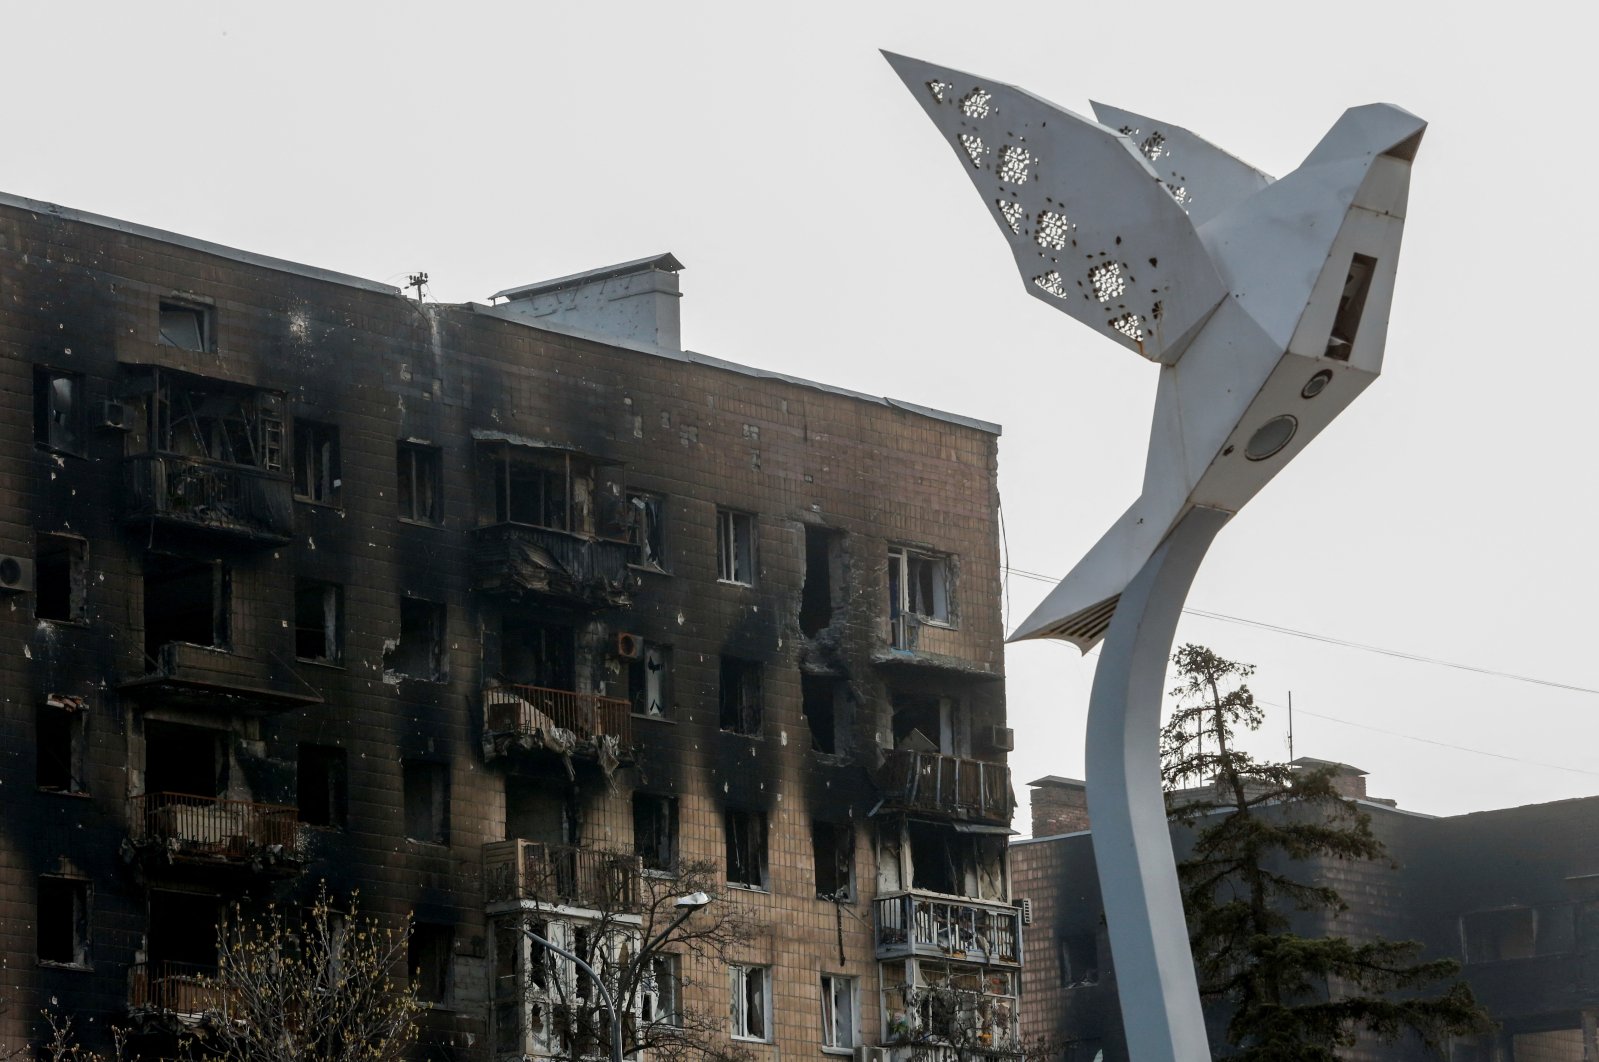 A view shows a lamp pole in the shape of a pigeon located in Freedom Square near a block of flats heavily damaged during the Russian invasion, in Mariupol, Ukraine, April 18, 2022. (Reuters Photo)